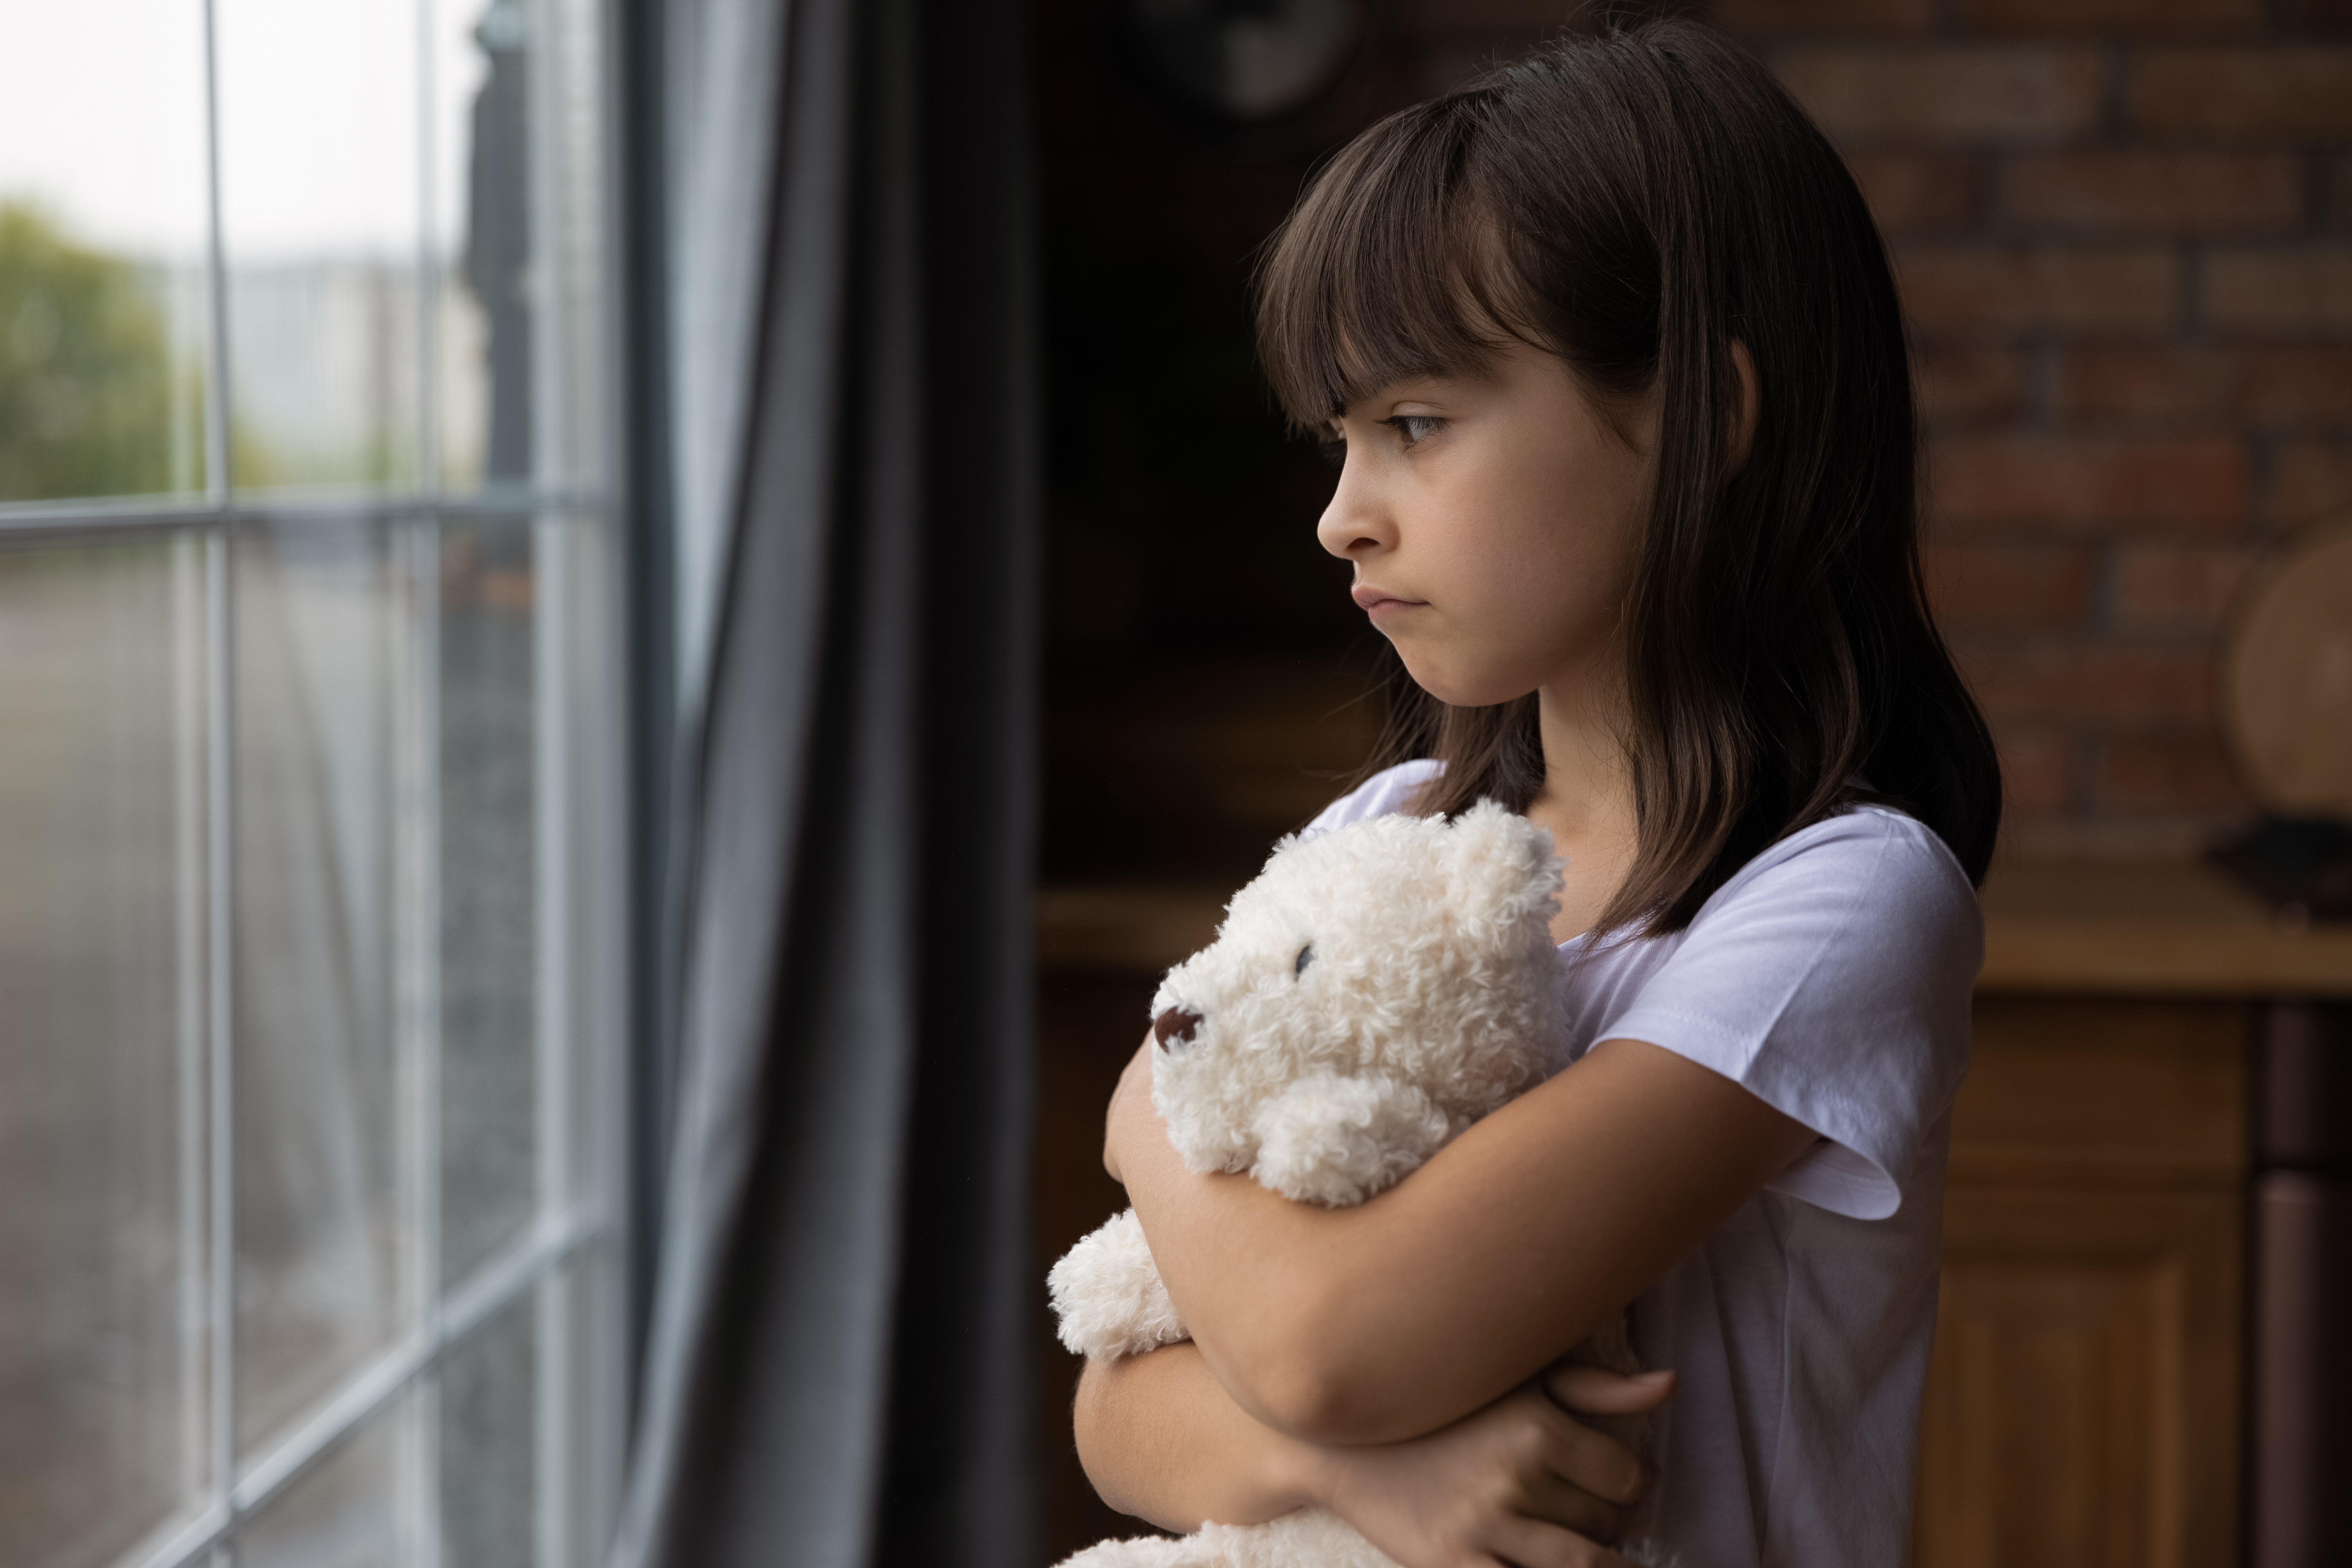 A girl looking outside a window while hugging a toy | Source: Shutterstock